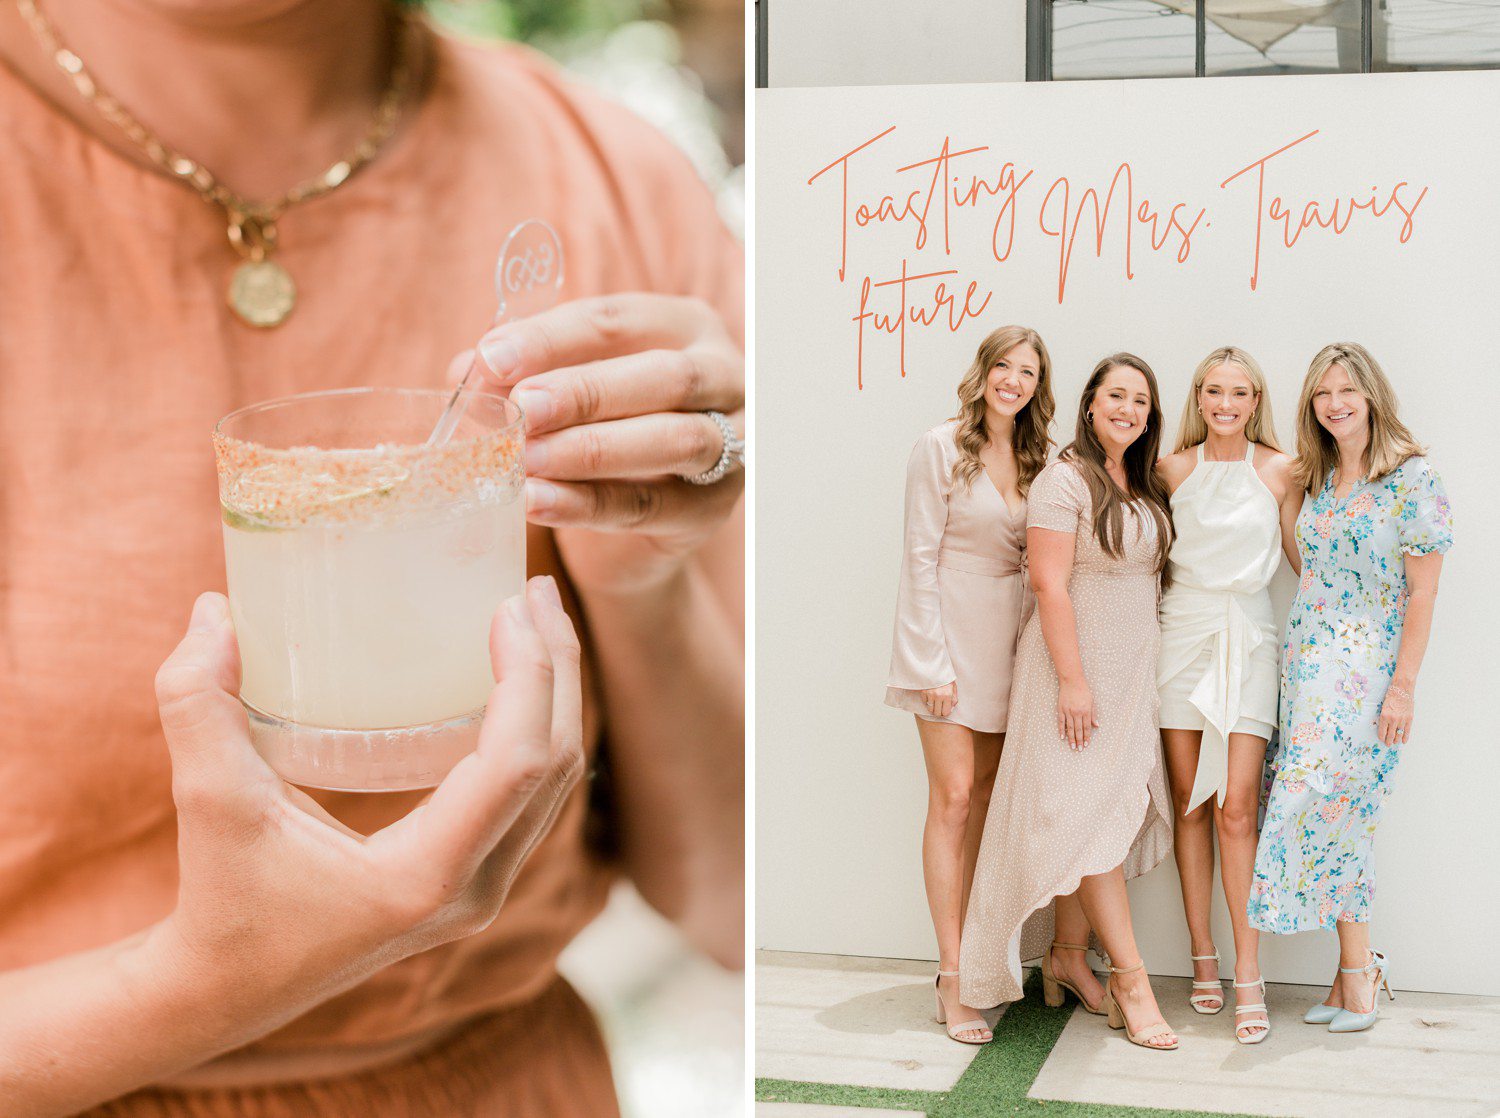 Emily Herren's Bridal Shower at The Eberly for Champagne & Chanel